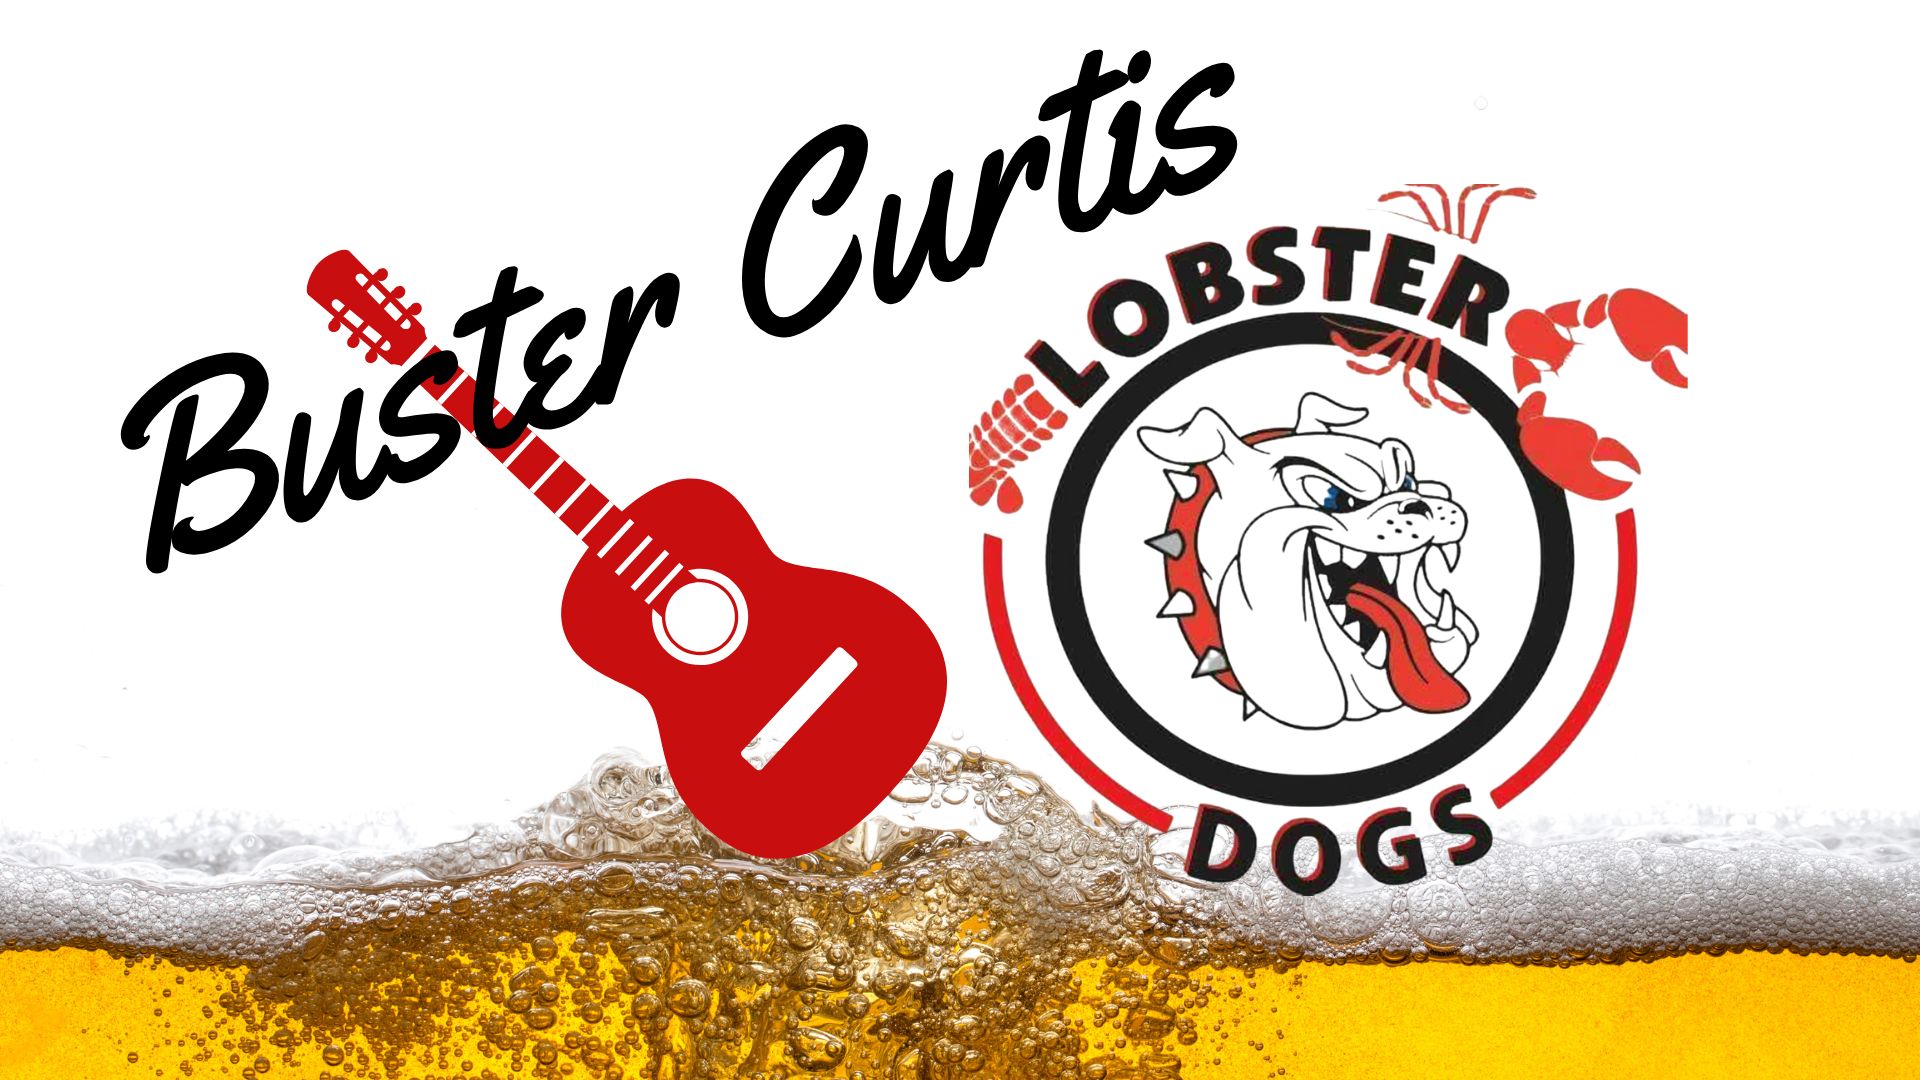 buster curtis lobster dogs food truck mill hill brewery warrenton nc january 2023